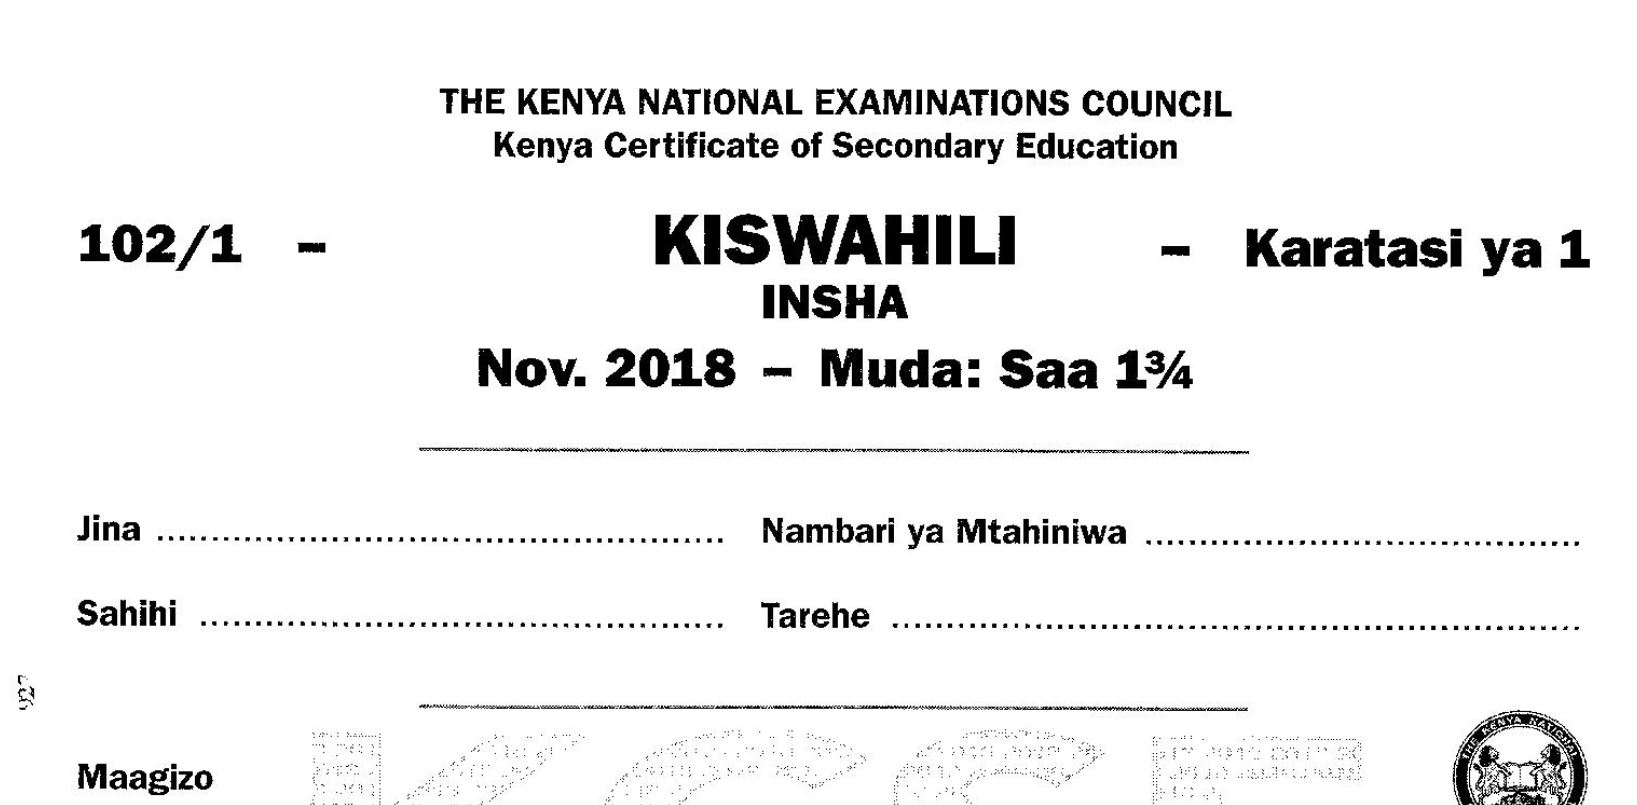 KCSE Kiswahili Paper 1, 2018 with KNEC Marking Scheme (Answers)